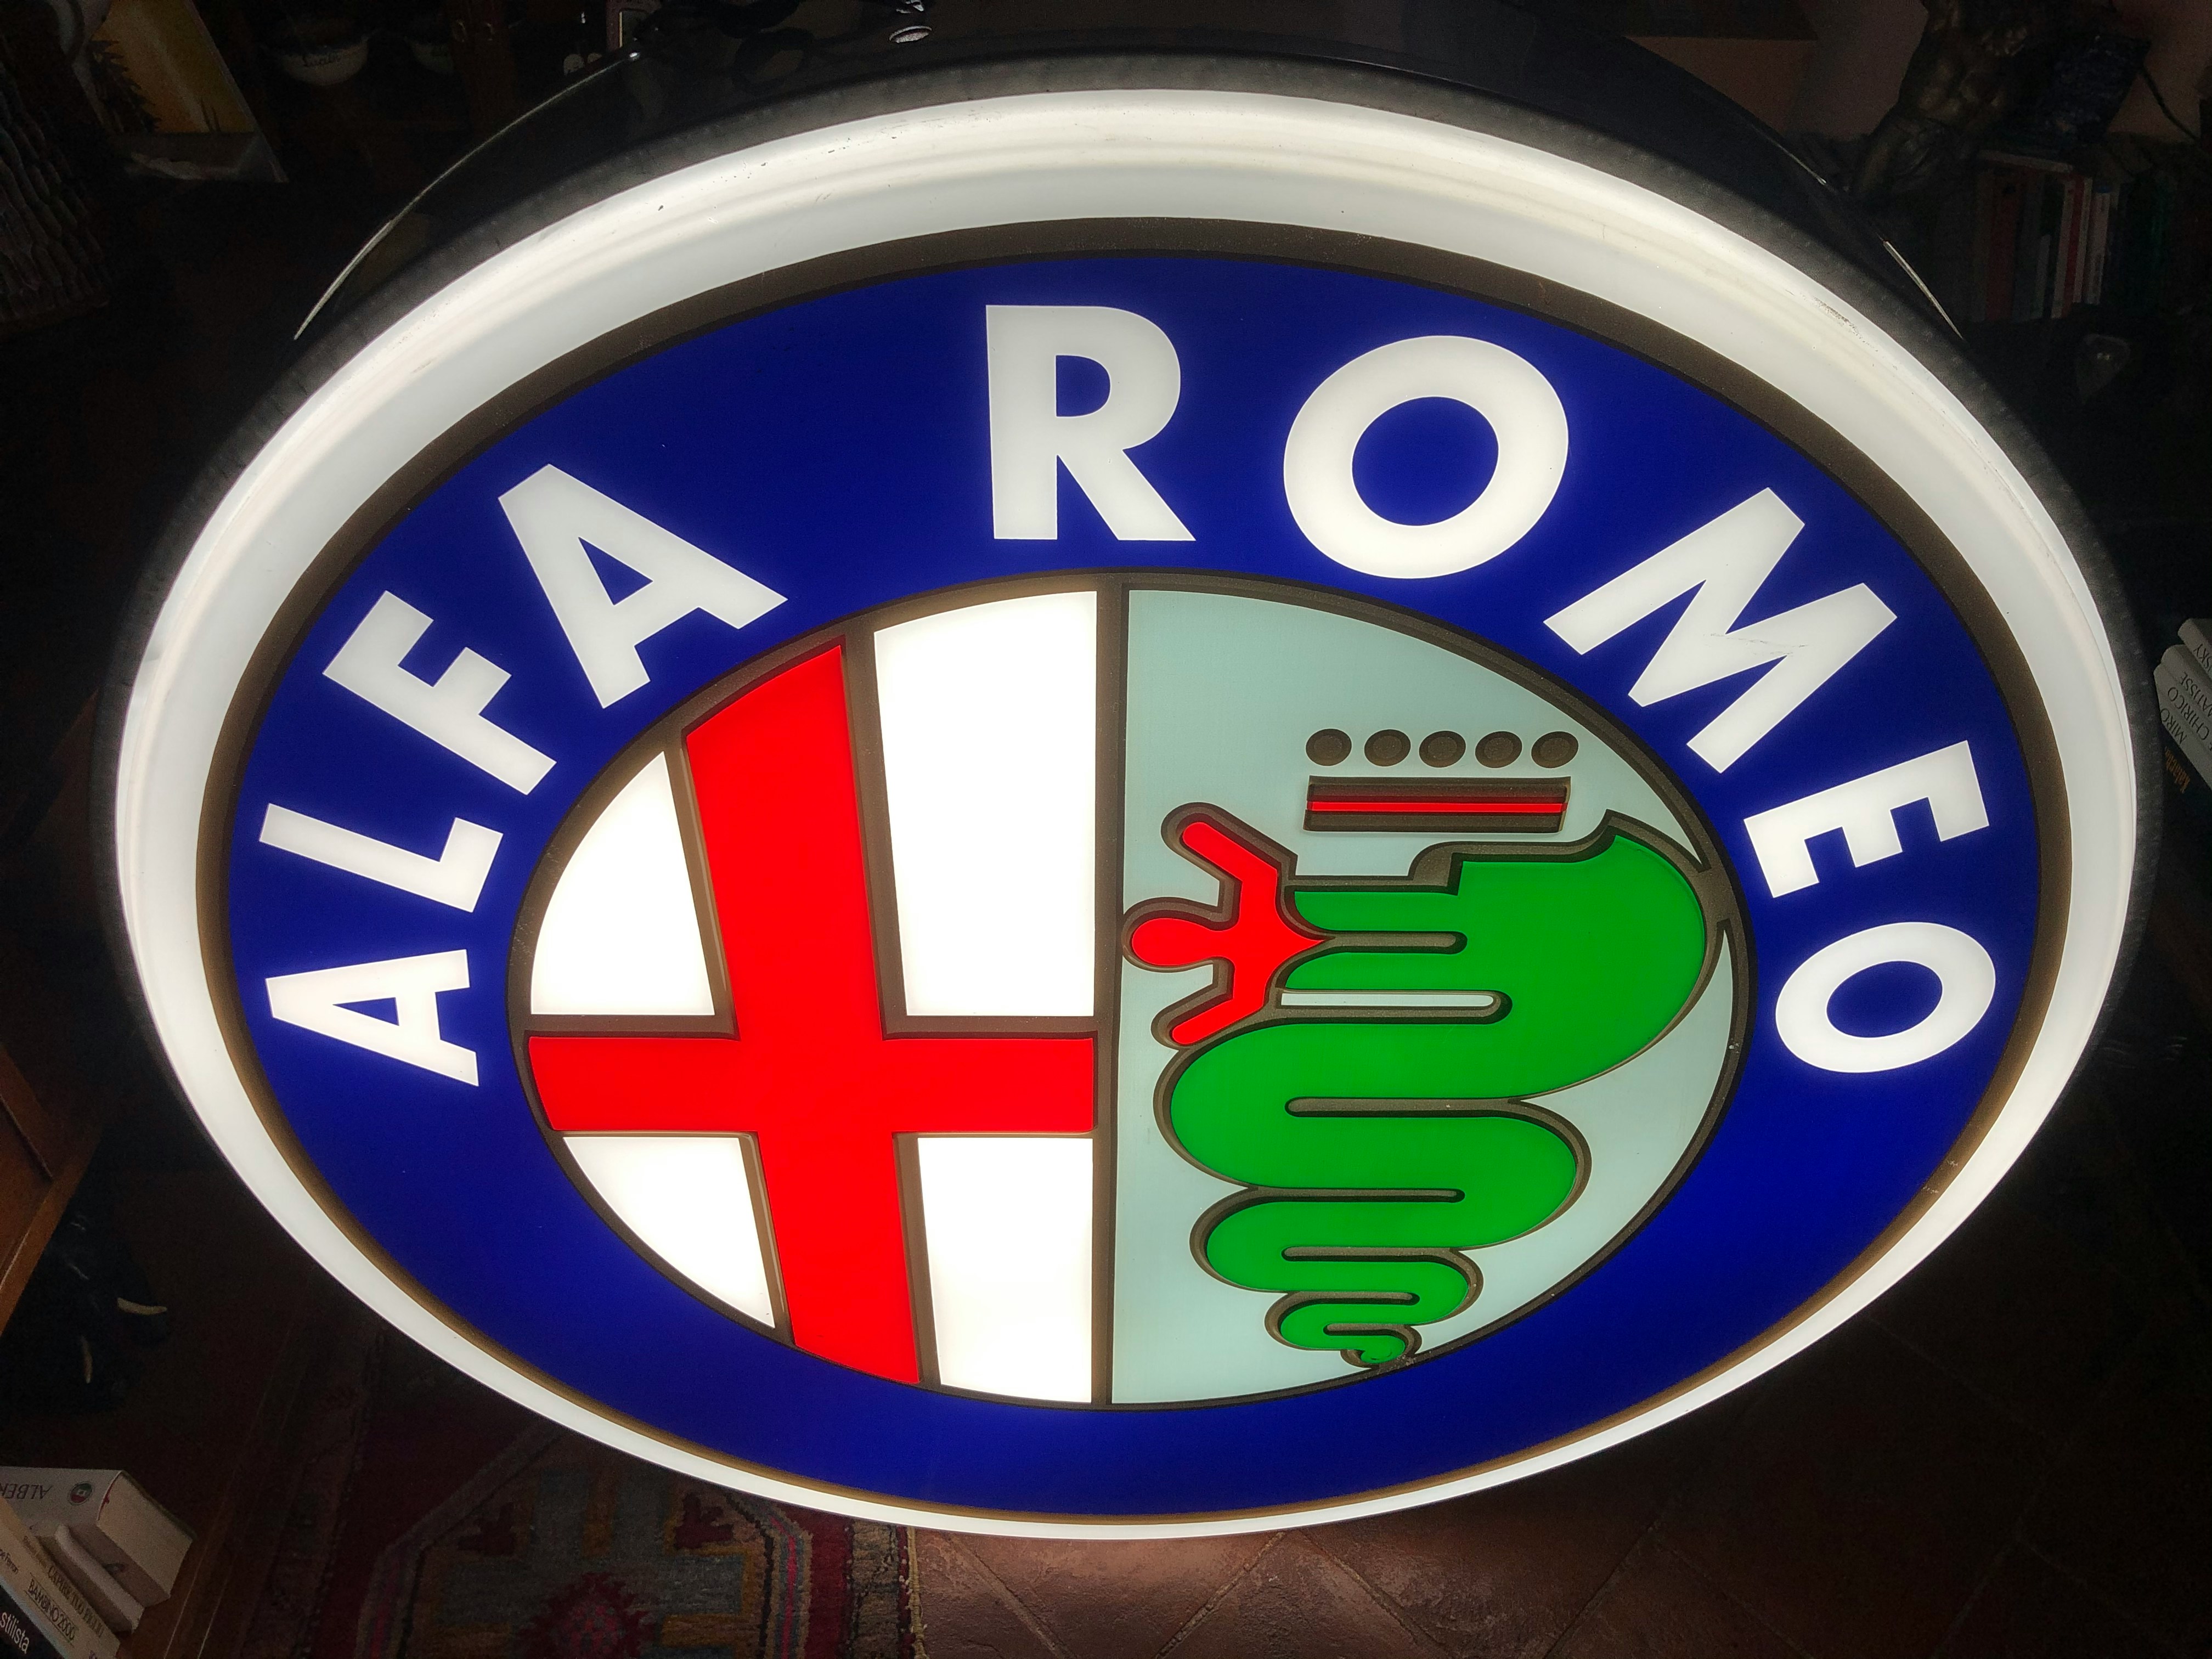 ALFA ROMEO DOUBLE SIDED ILLUMINATED SIGN for sale by auction in Siena, Italy